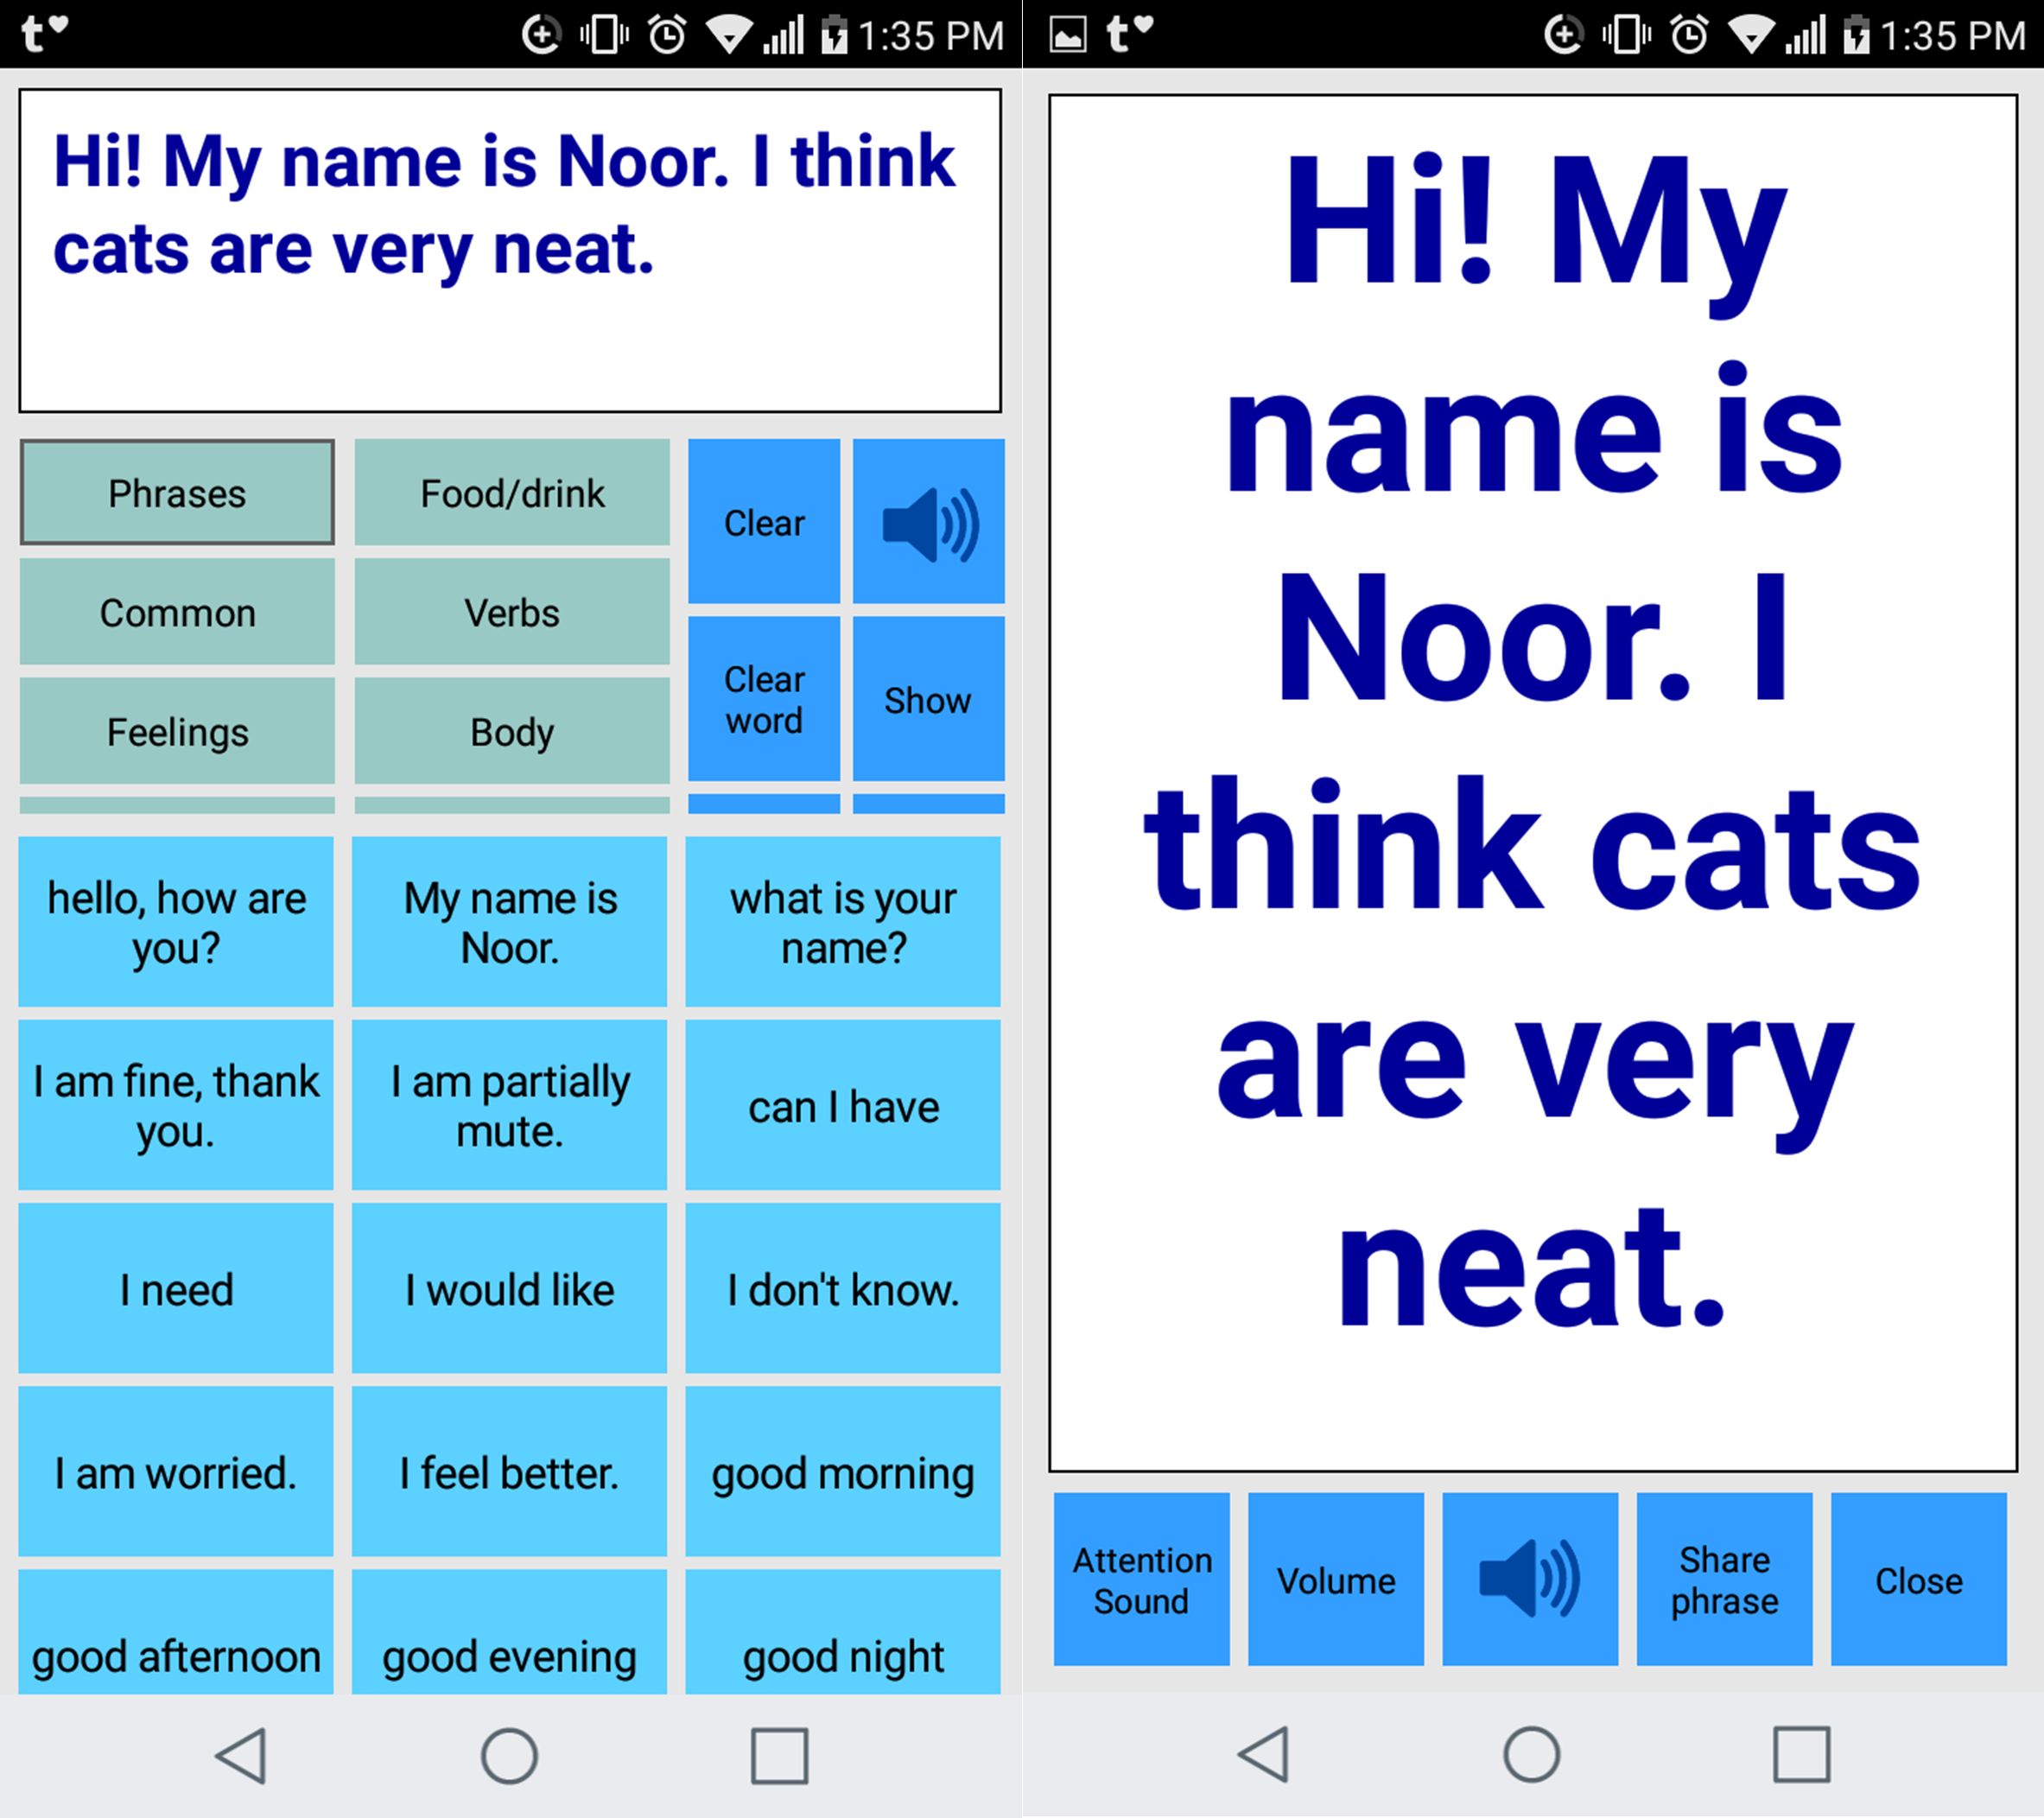 Two images combined: Image 1: AAC app screen, with the phrase “Hi! My name is Noor. I think cats are very neat.” in the top text box. There are buttons with pre-set phrases underneath it. Image 2: AAC app screen with the phrase: “Hi! My name is Noor. I think cats are very neat.” and some smaller buttons underneath